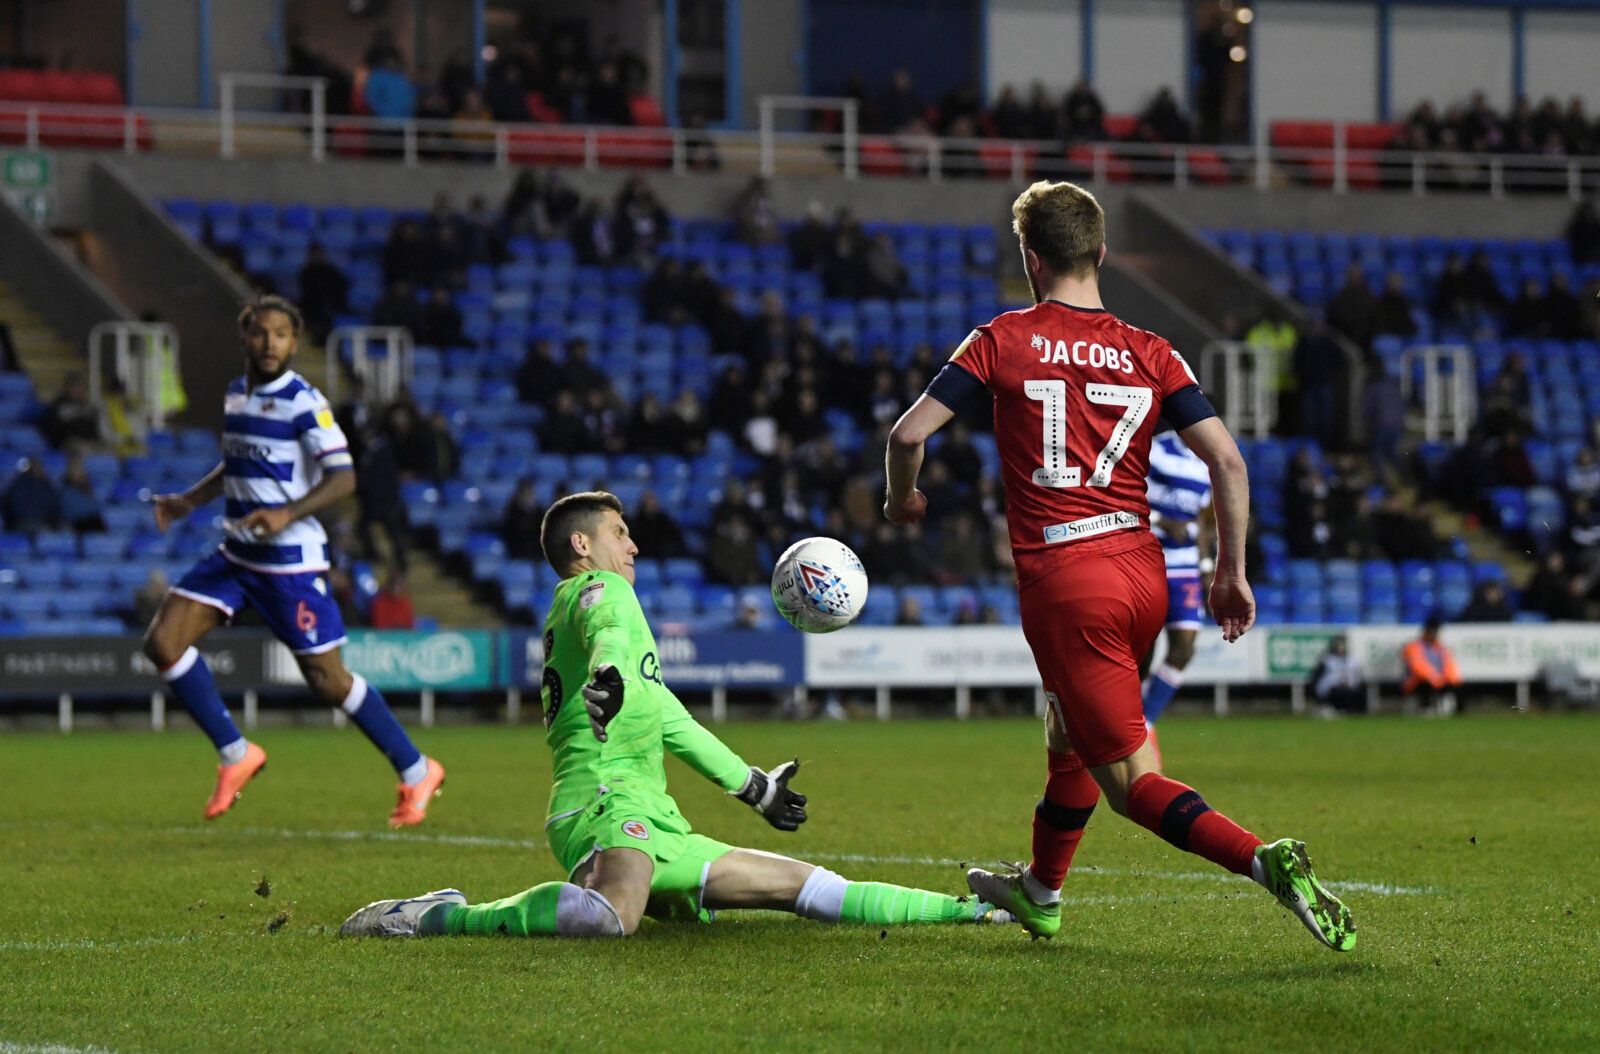 Soccer Football - Championship - Reading v Wigan Athletic - Madejski Stadium, Reading, Britain - February 26, 2020  Wigan's Michael Jacobs scores their third goal  Action Images/Tony O'Brien  EDITORIAL USE ONLY. No use with unauthorized audio, video, data, fixture lists, club/league logos or 